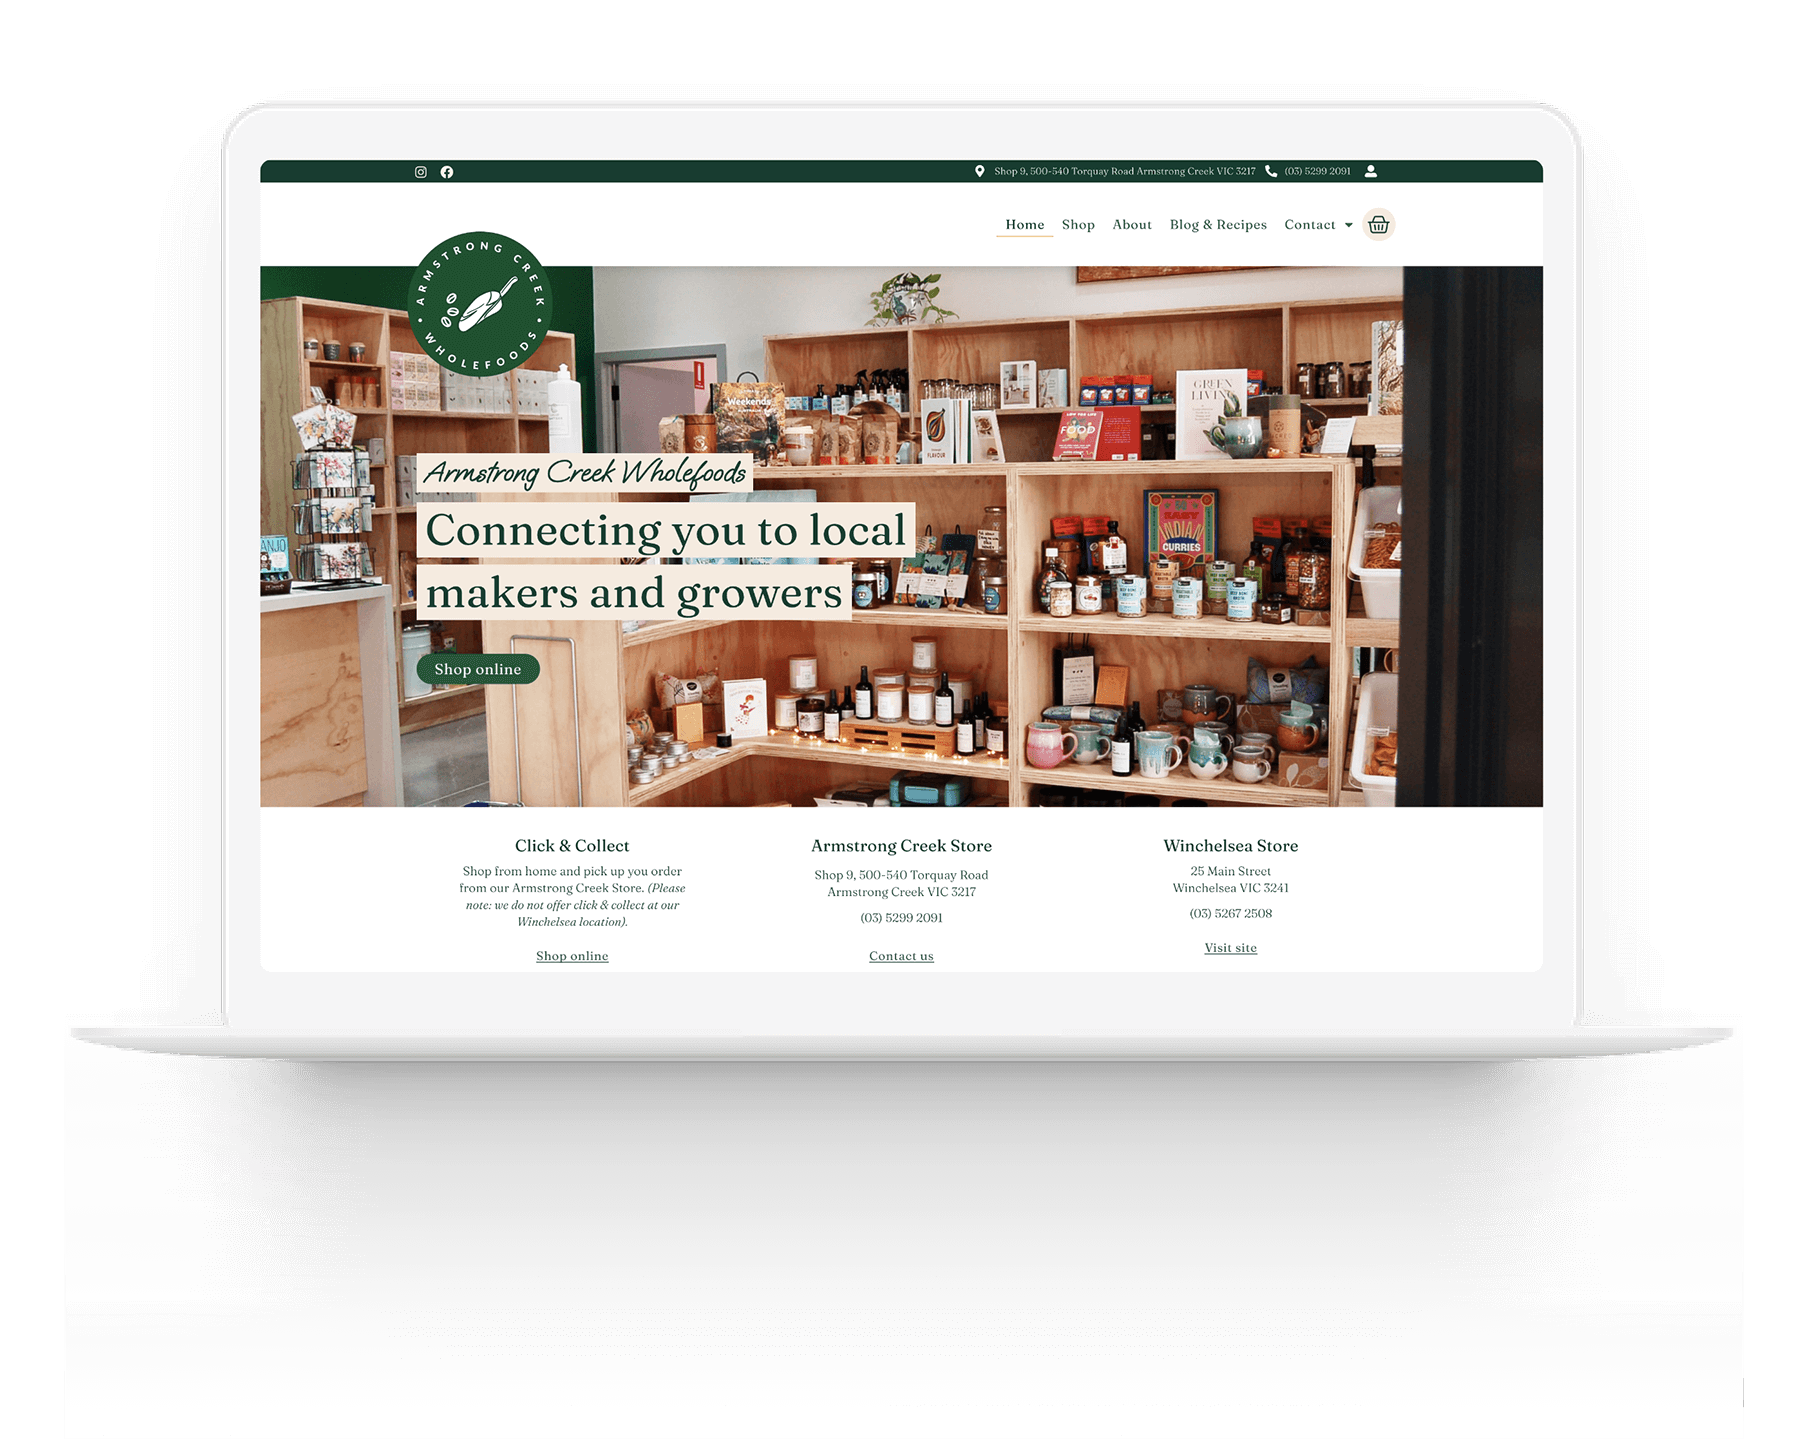 Armstrong Creek Wholefoods website preview on a laptop